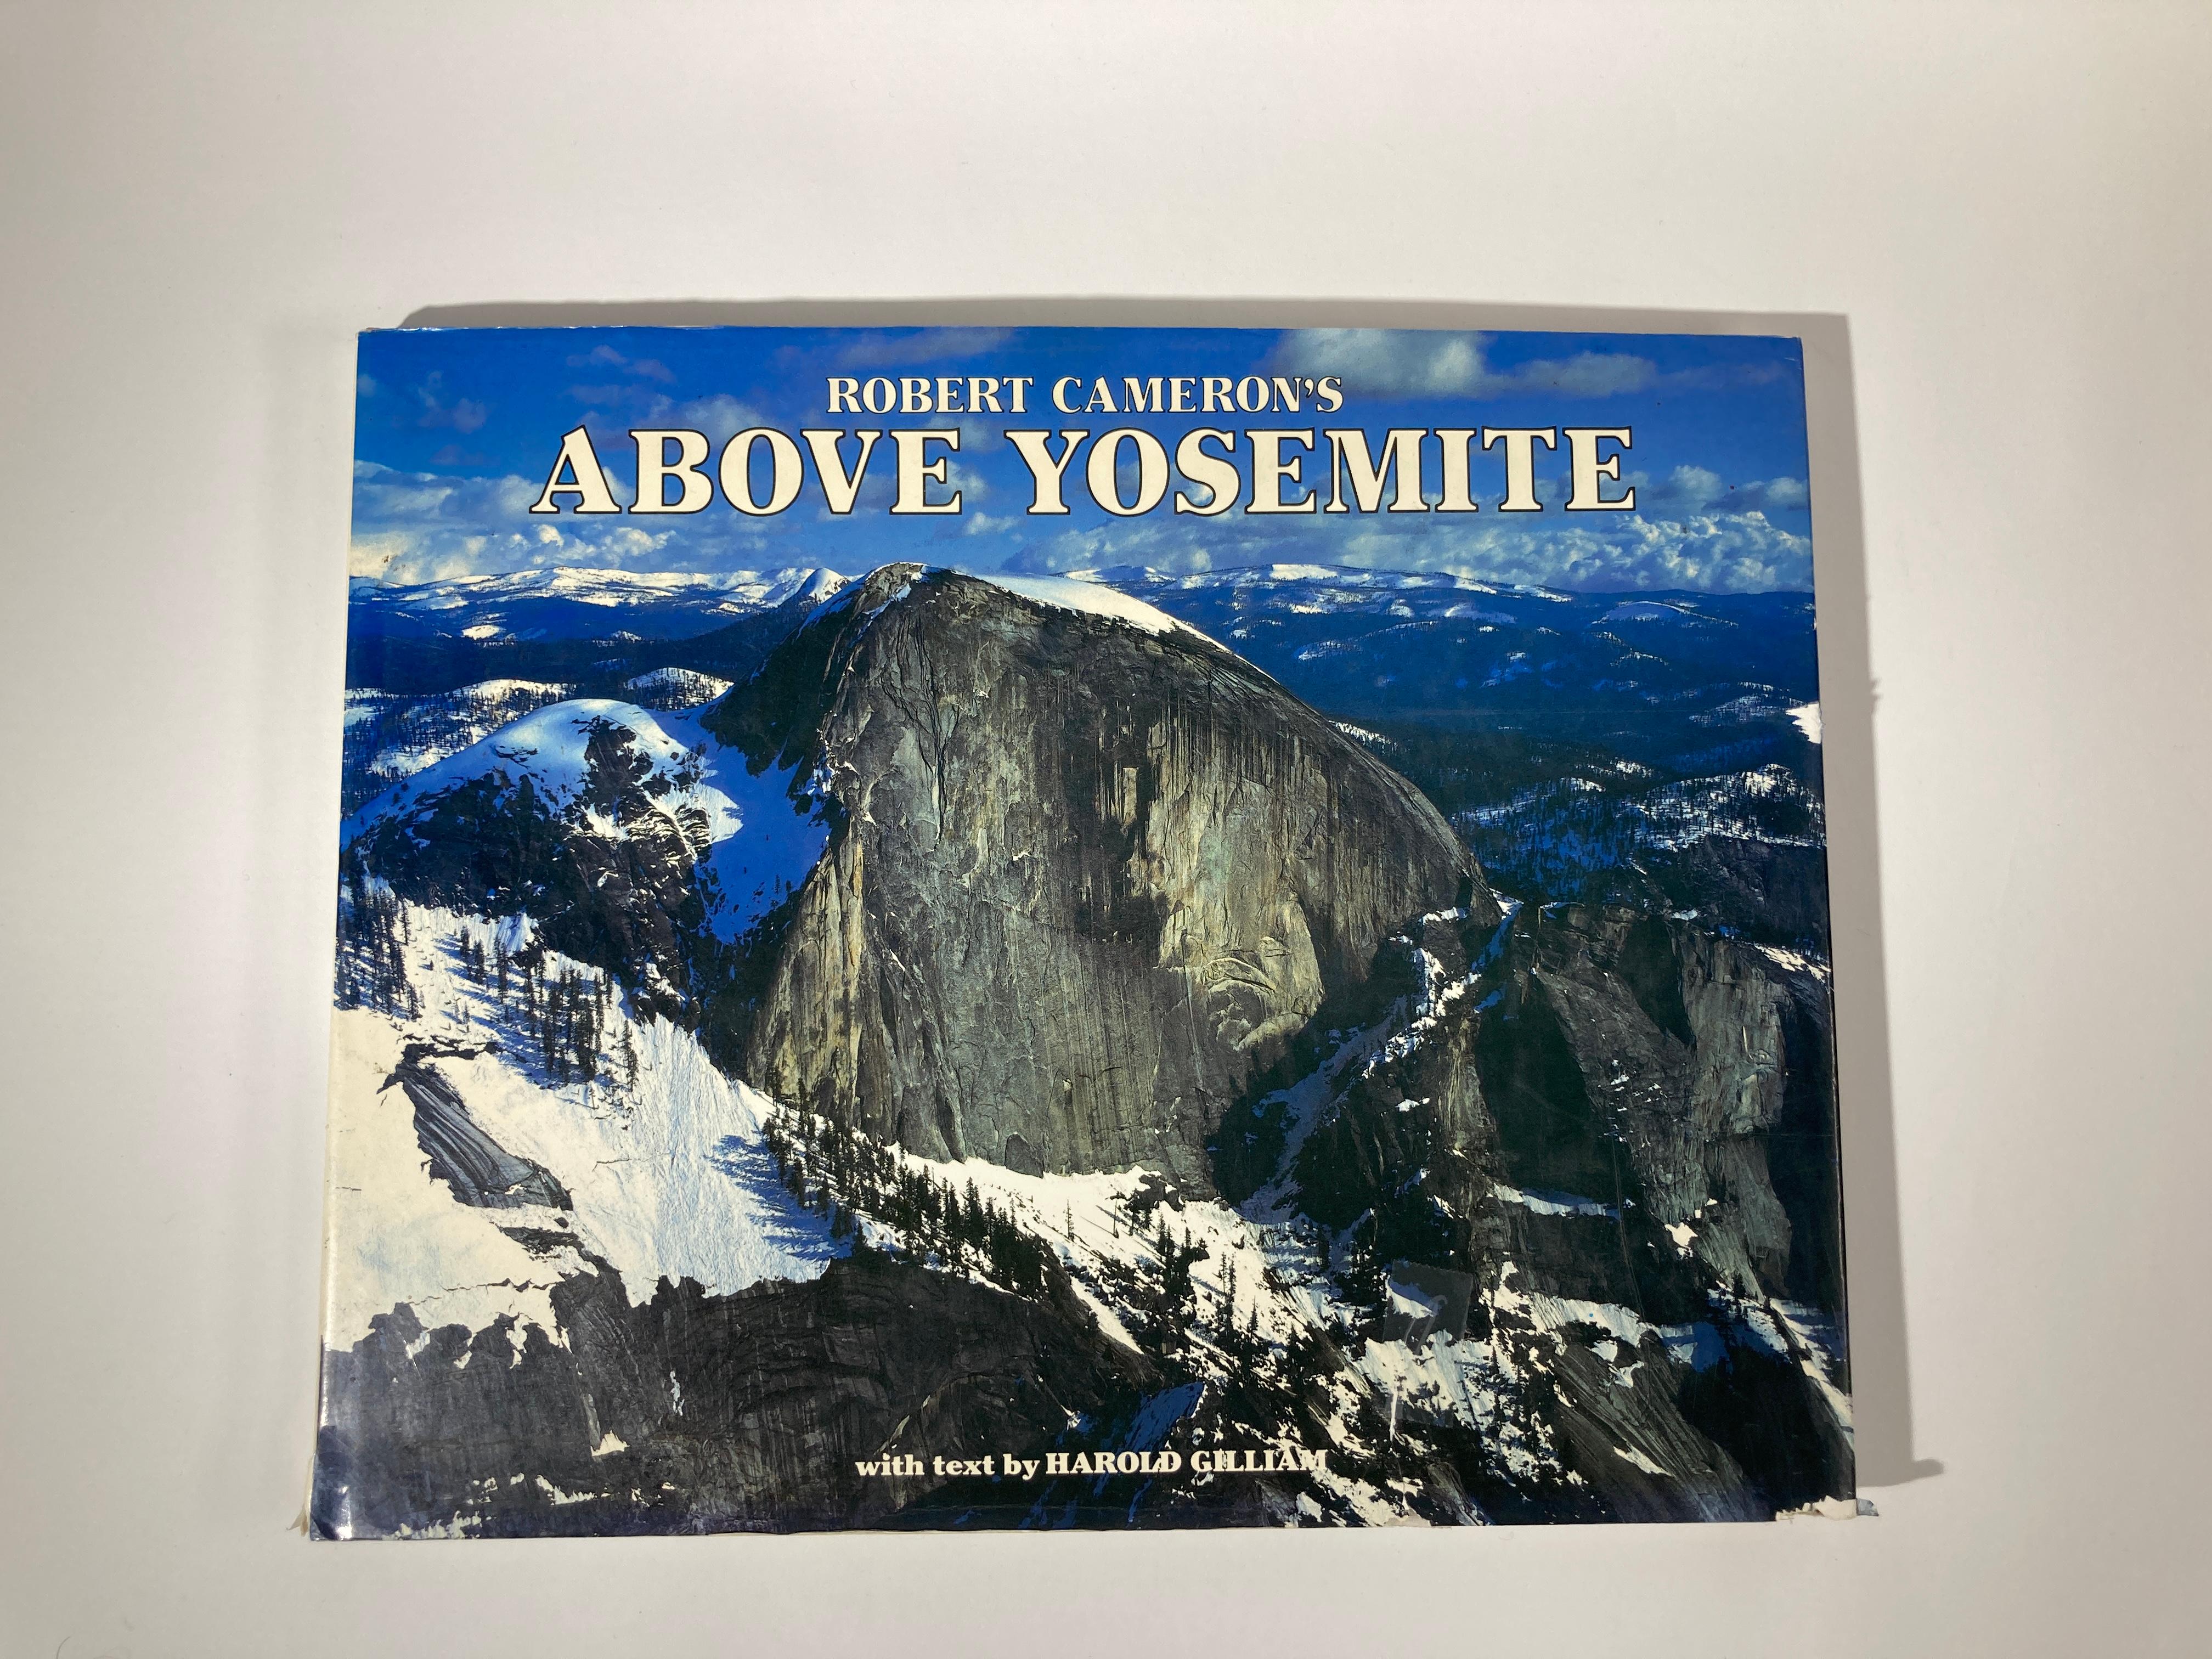 Robert Cameron's Above Yosemite
Robert Cameron, Harold Gilliam
Title: Robert Cameron's Above Yosemite
Publisher: Cameron & Company
Publication Date: 1983
Binding: Hardcover
Book Condition: Good
Synopsis:
The nation's capitol is here